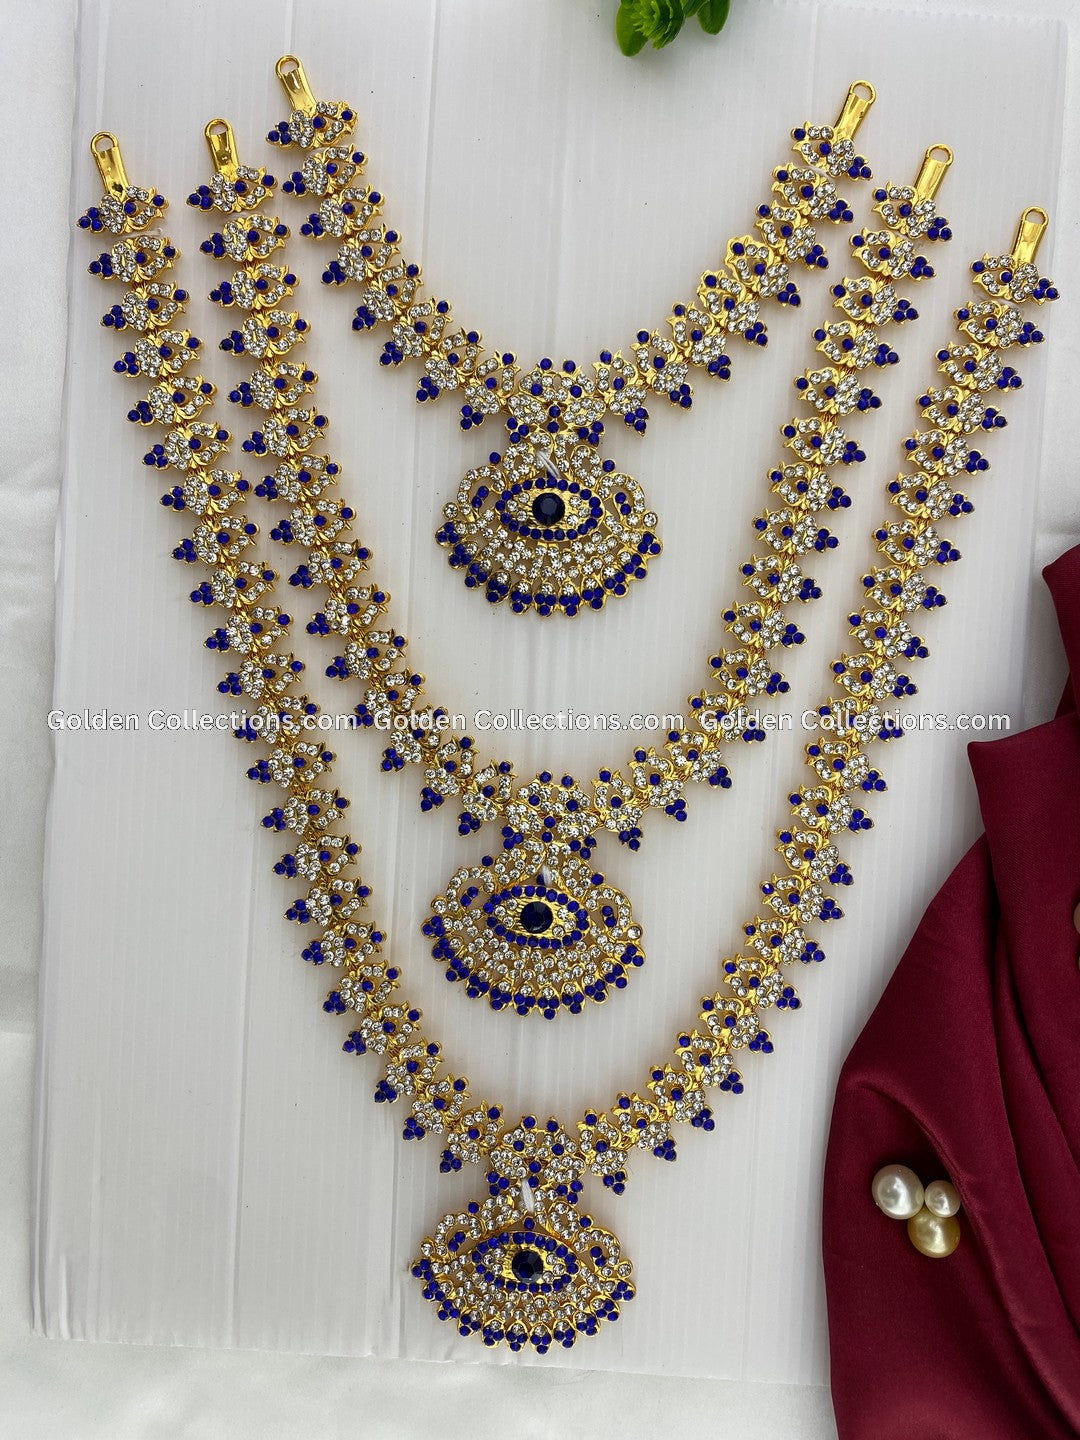 Exquisite Deity Long Necklace Collection - GoldenCollections